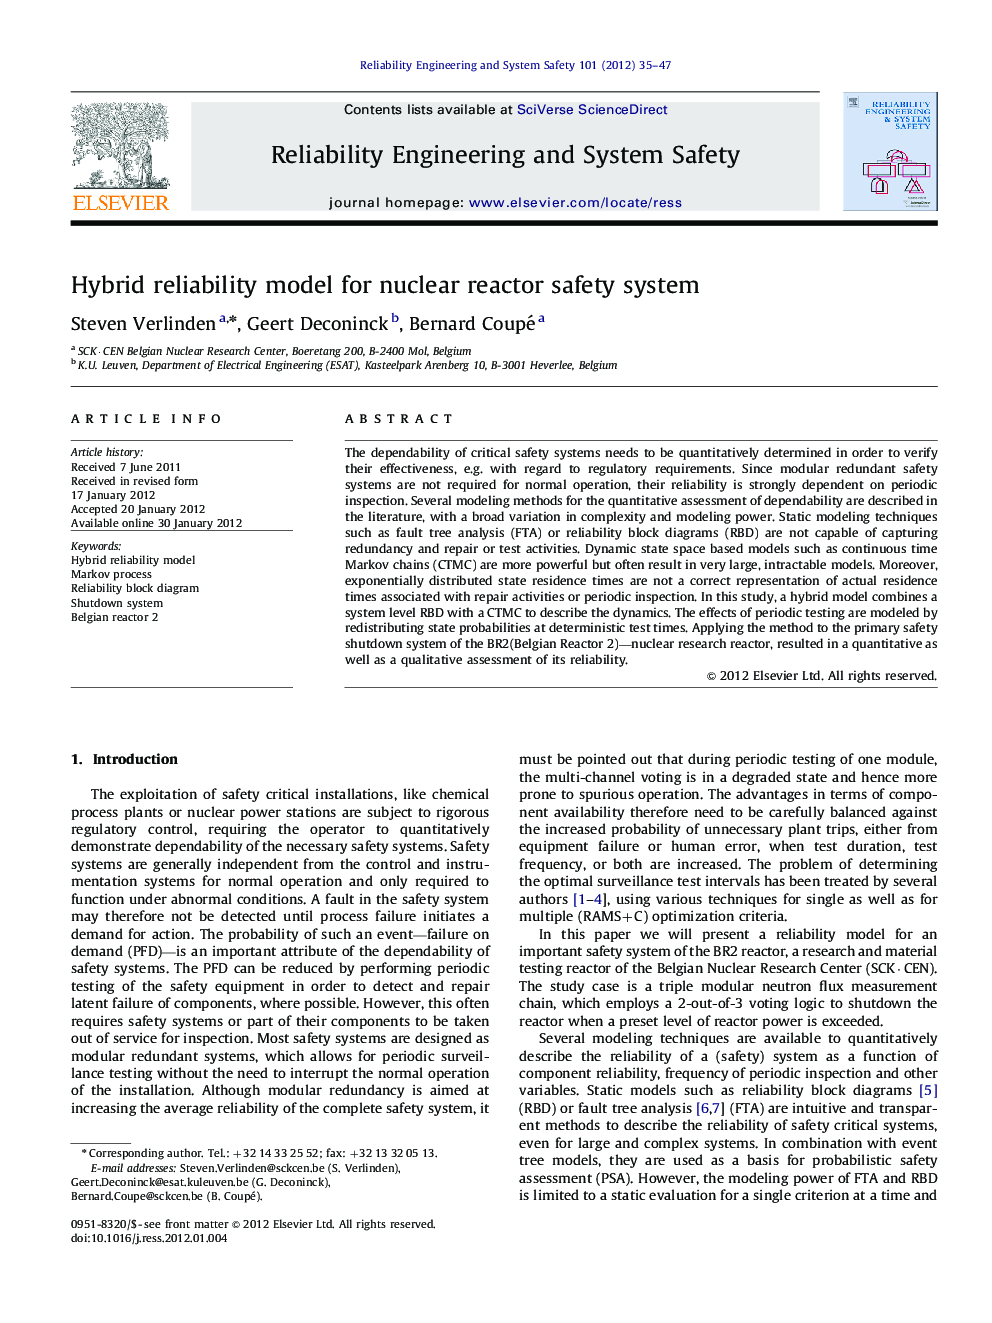 Hybrid reliability model for nuclear reactor safety system